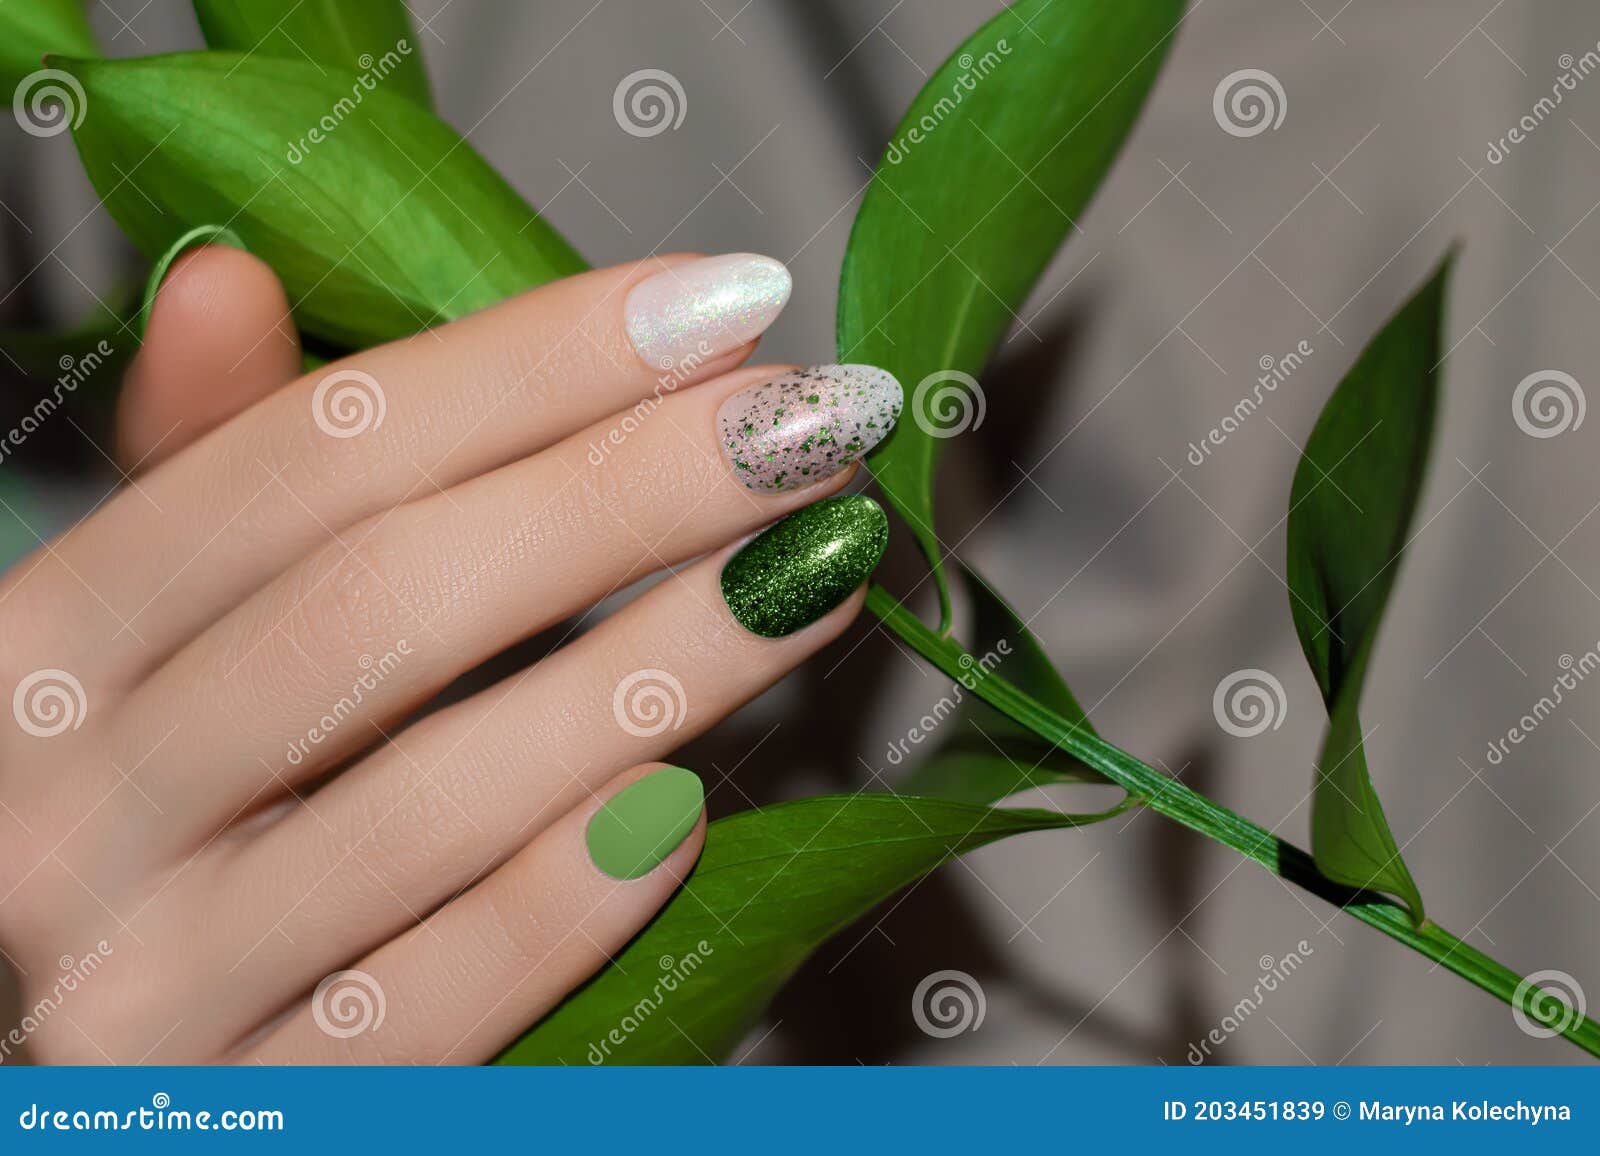 45 Best Fall Nail Ideas 2021 : Green and White nails with Gold Foil Accents  | White nails, White nails with gold, Emerald nails